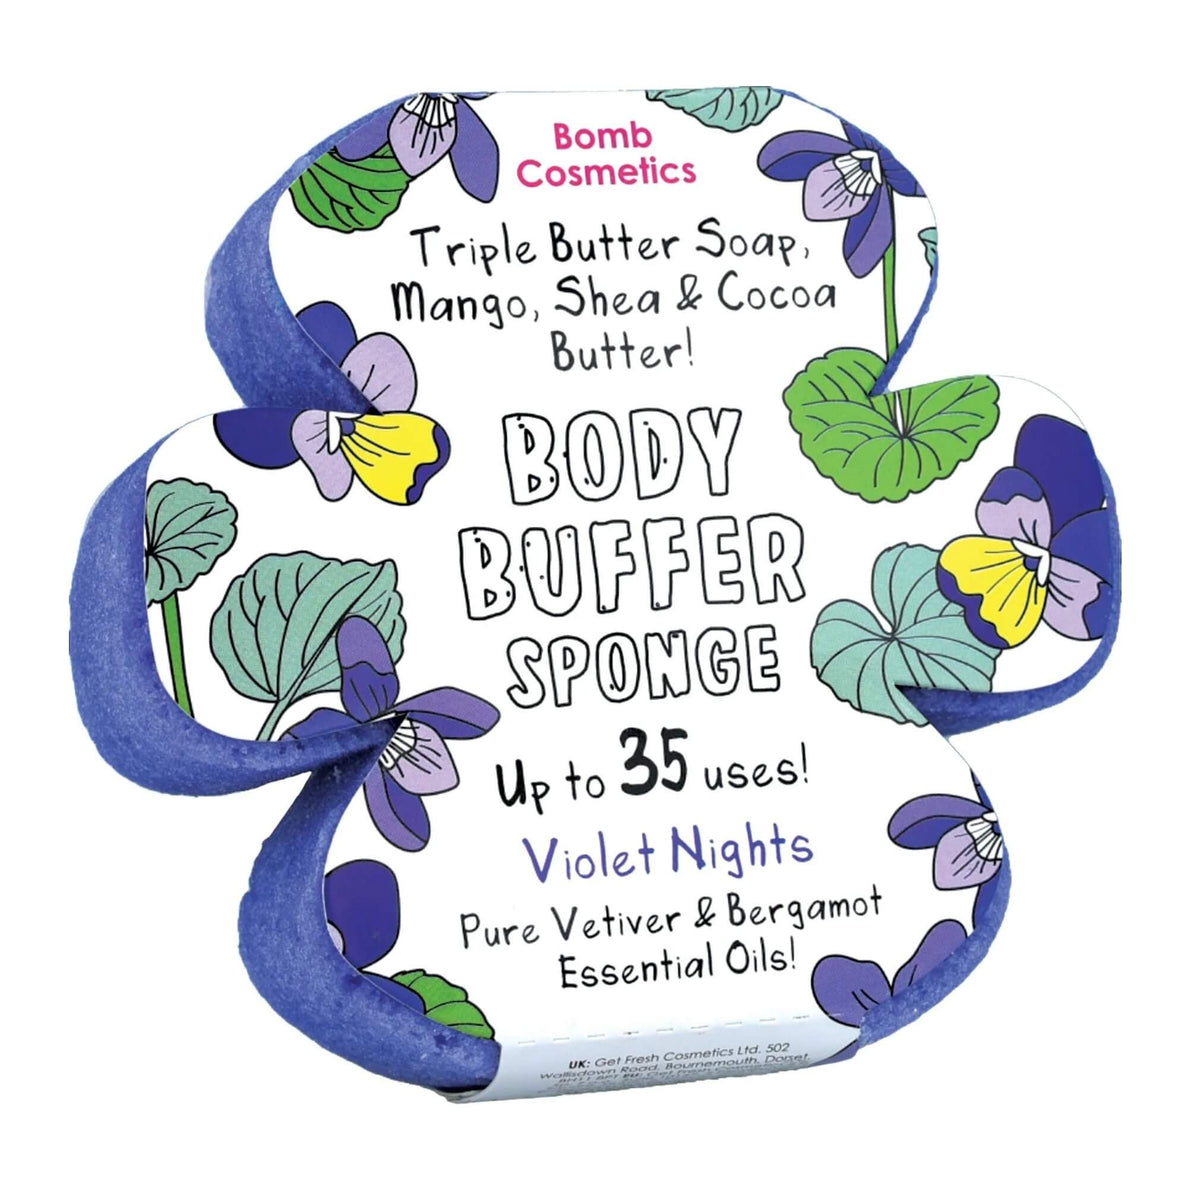 Violet Nights Body Buffer Sponge by Bomb Cosmetics at Under the Sun Southend shop